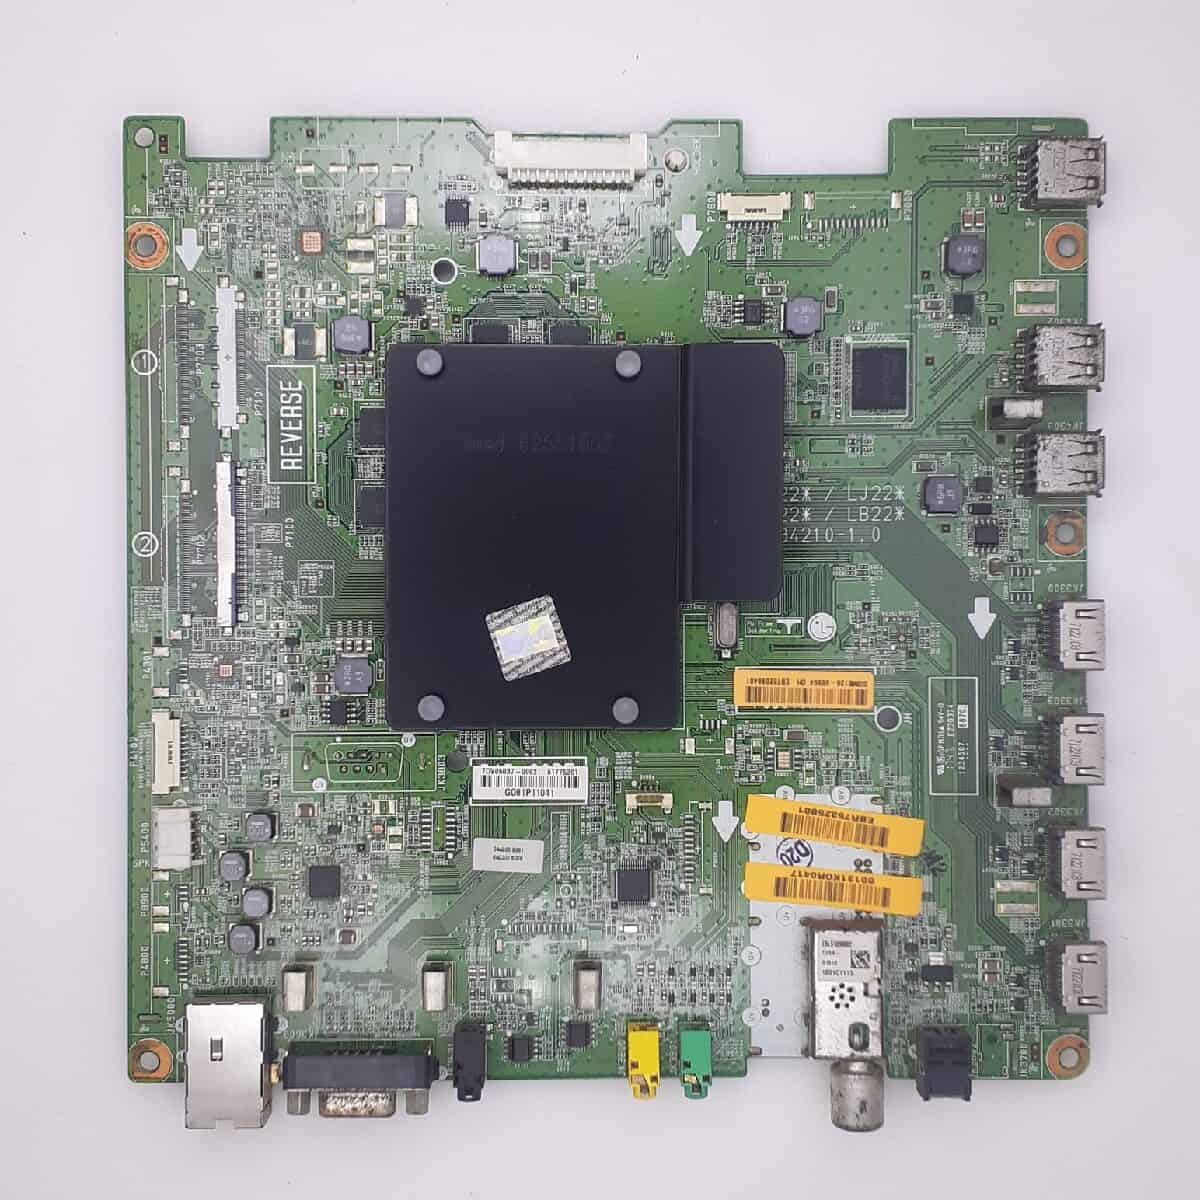 42LM6200-TA LG MOTHERBOARD FOR LED TV